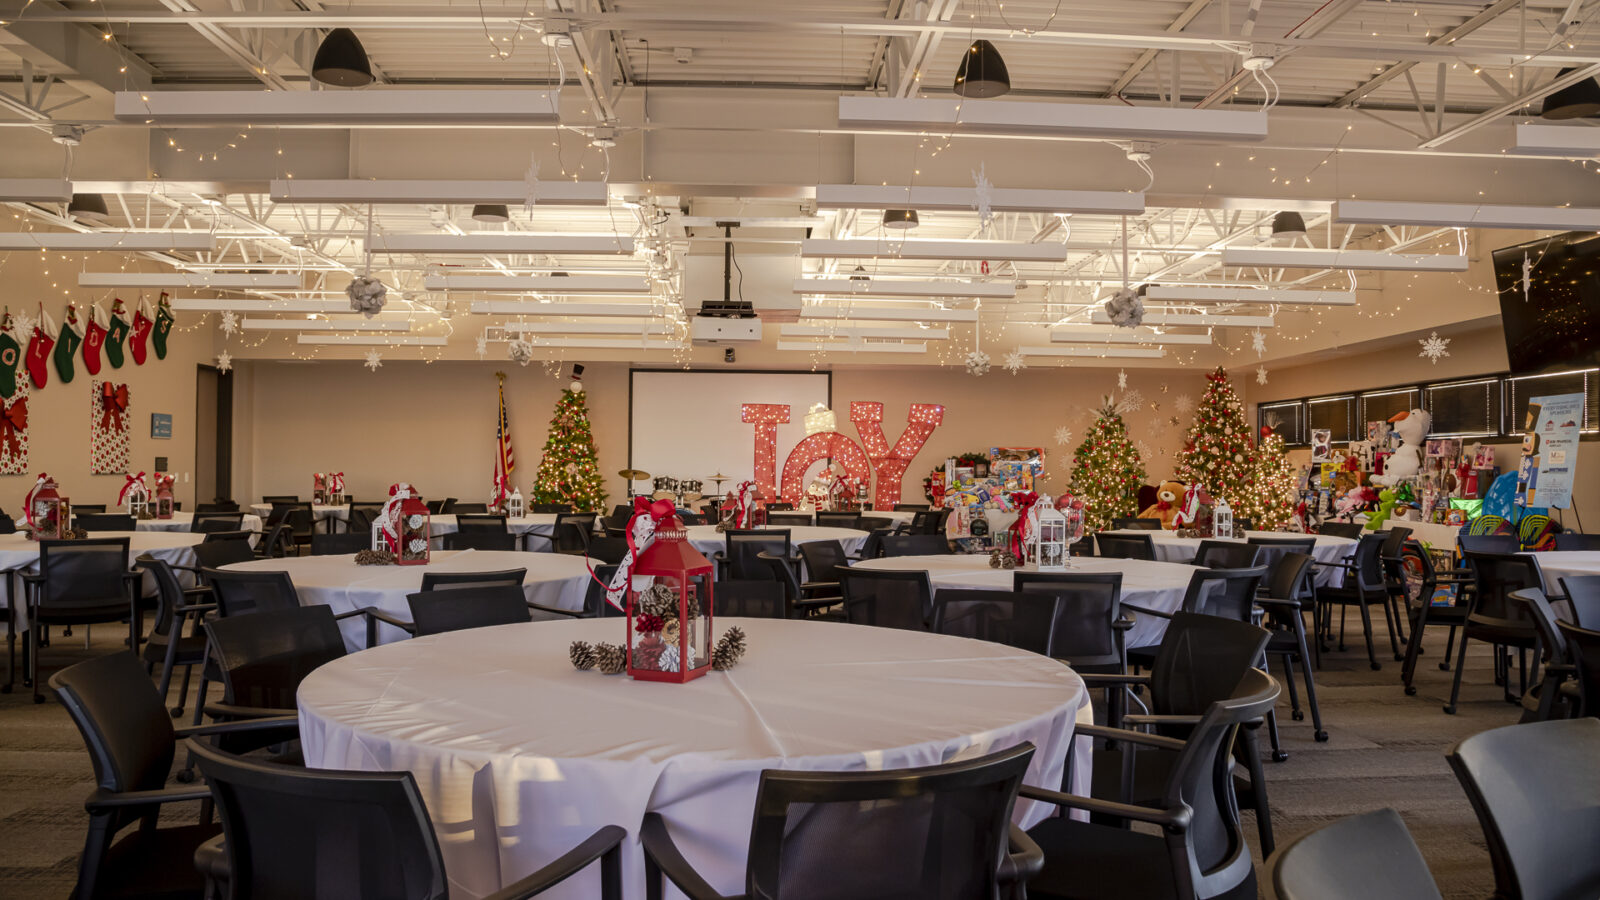 2019 SMDRA Holiday Brunch and Toy Drive for Boys and Girls Clubs